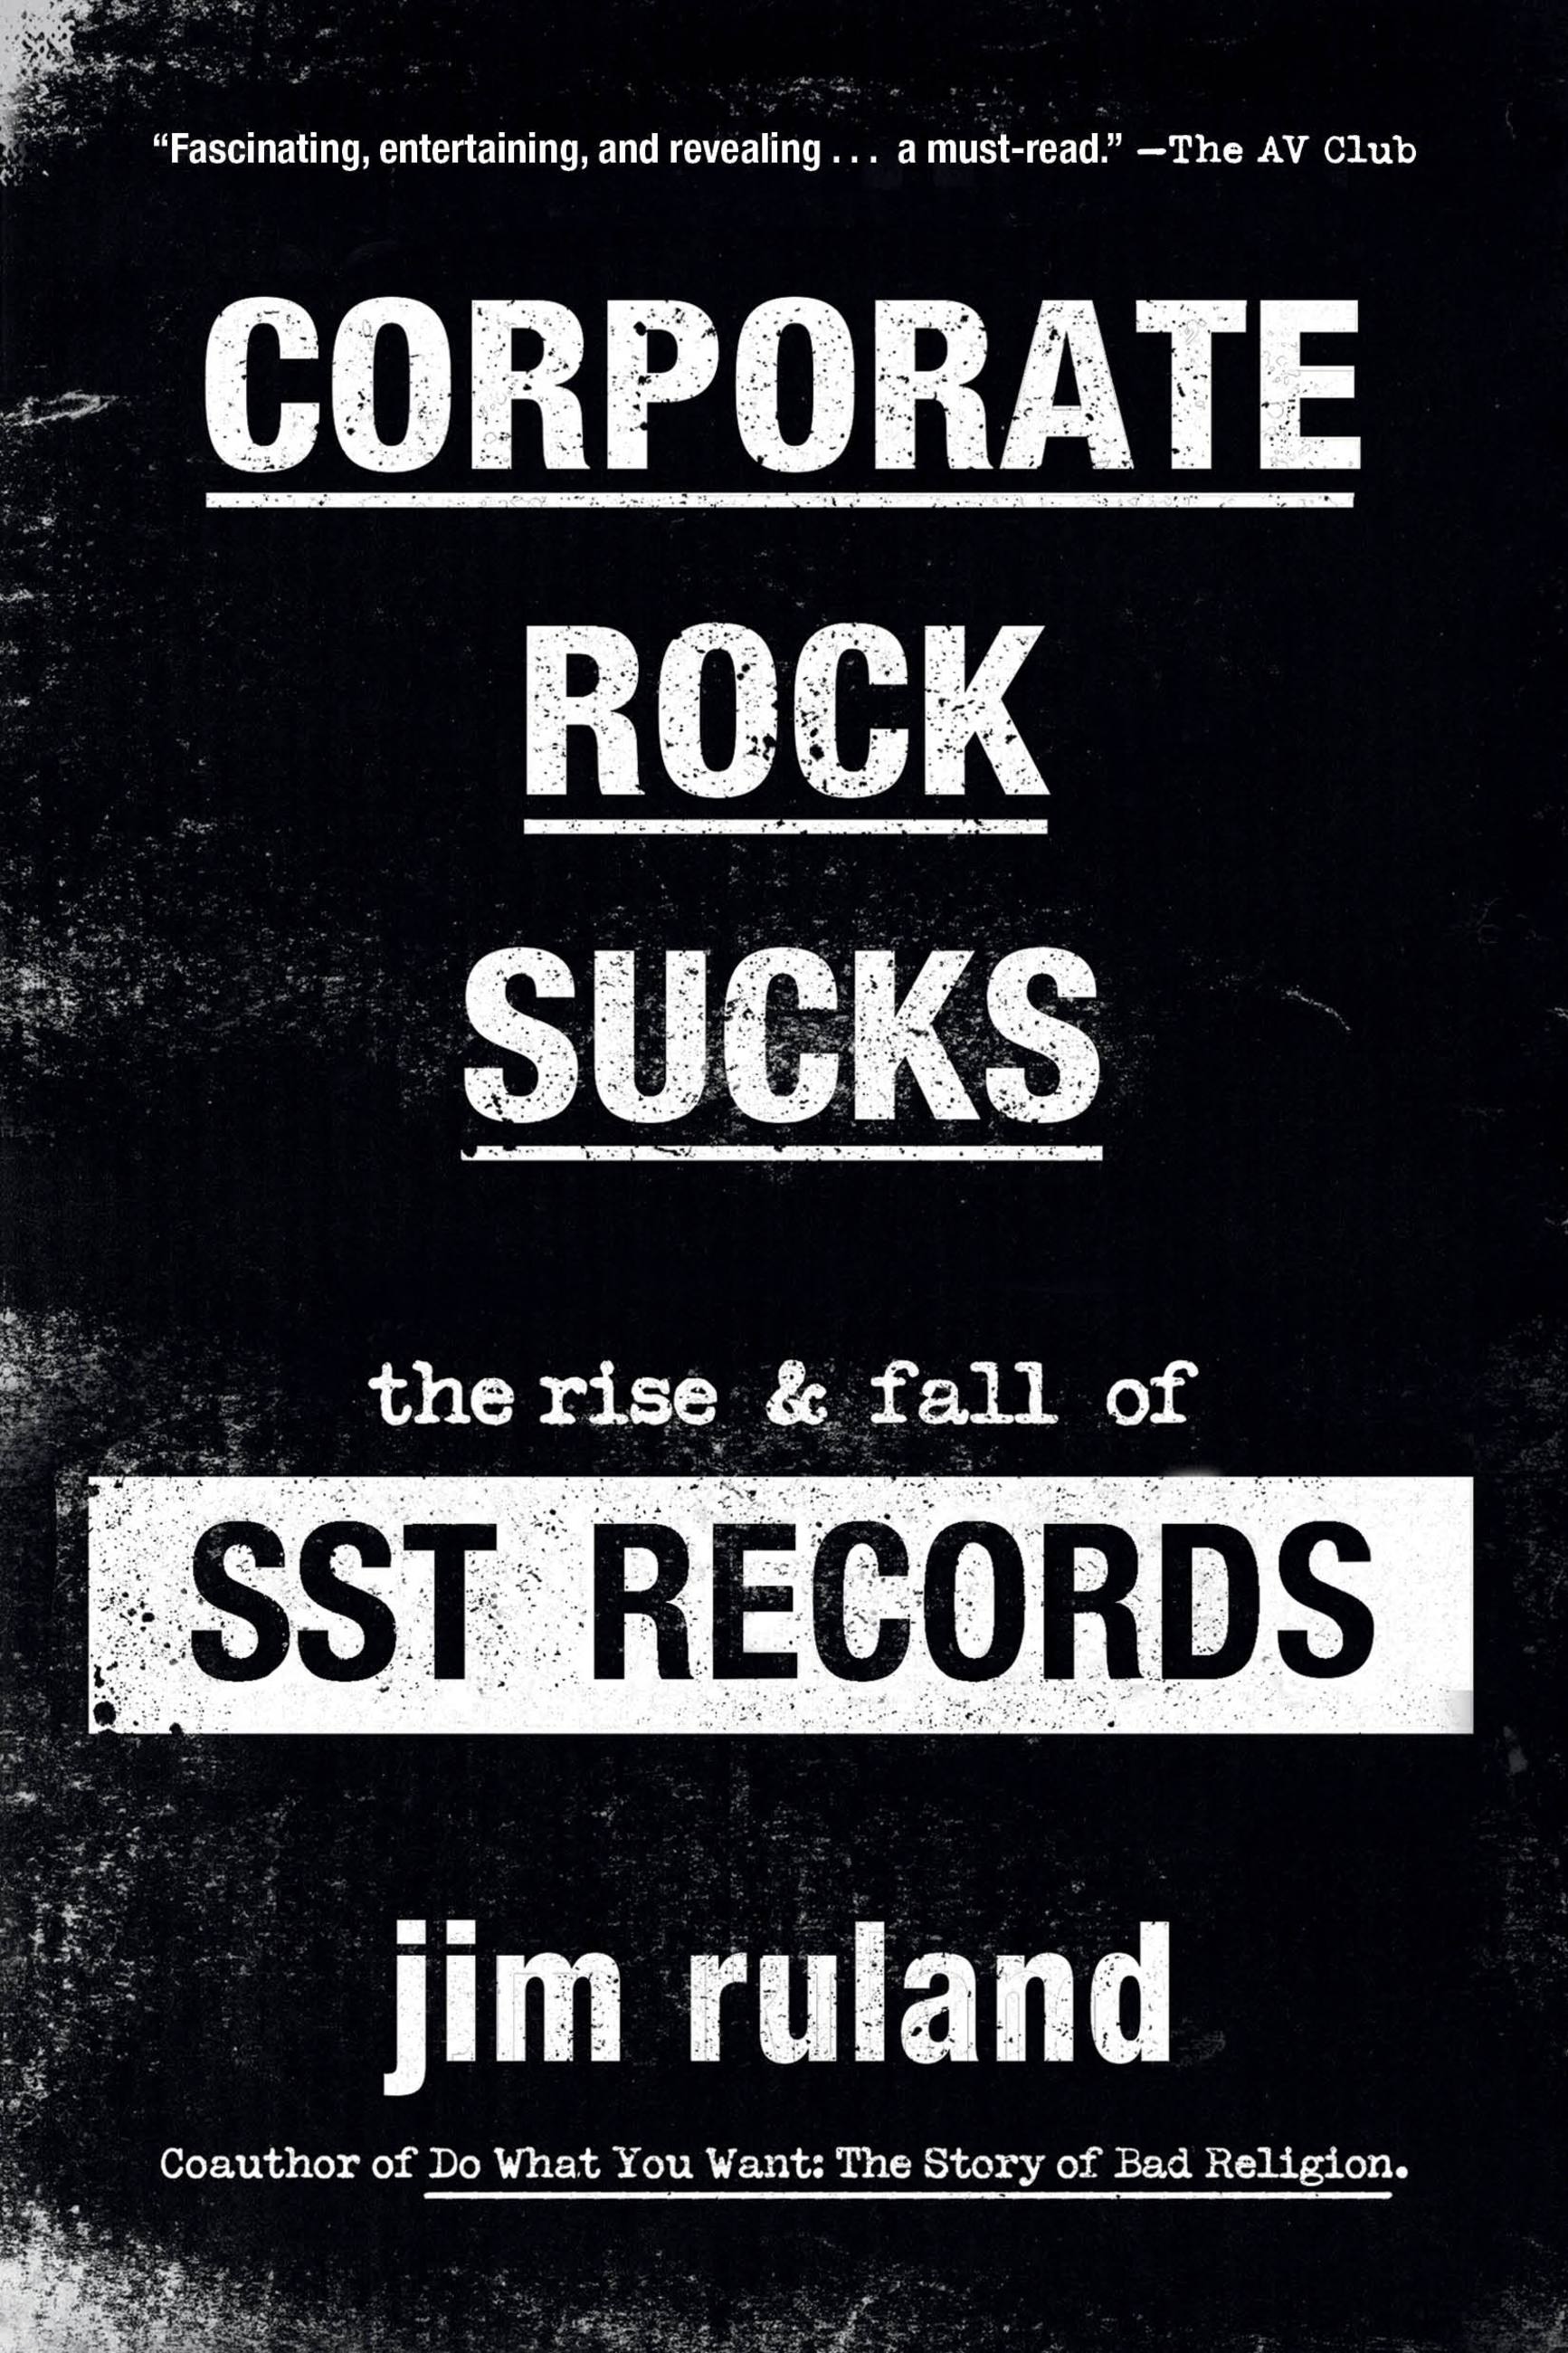 Corporate Rock Sucks by Jim Ruland Hachette Book Group photo pic pic